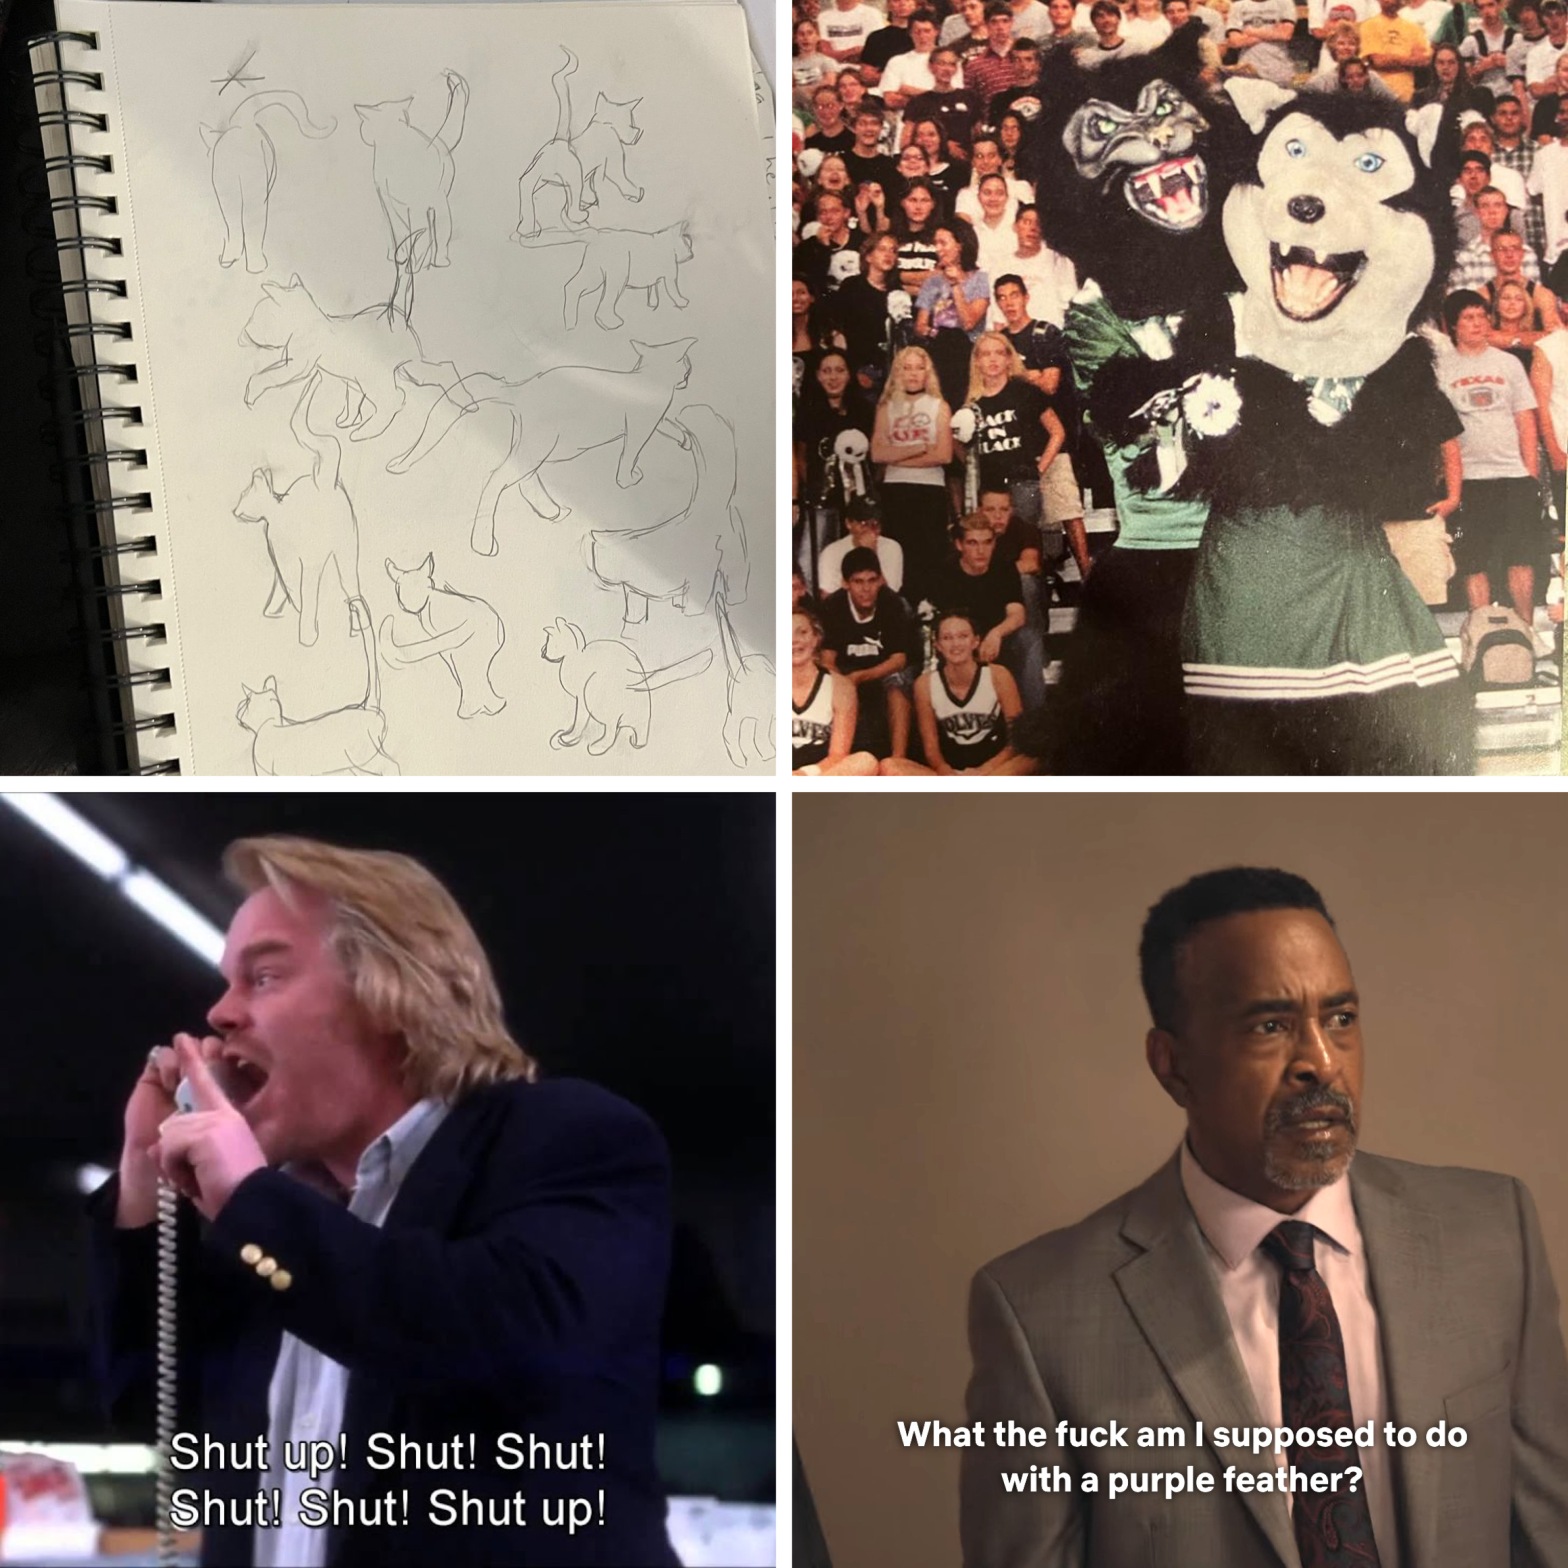 Several drawings of cat butts, a friendly timber wolf school mascot and a scary timber wolf school mascot, Philip Seymour Hoffman yelling “Shut up!” in Punch Drunk Love, and Tim Meadows wondering what to do with a purple feather in I Think You Should Leave.